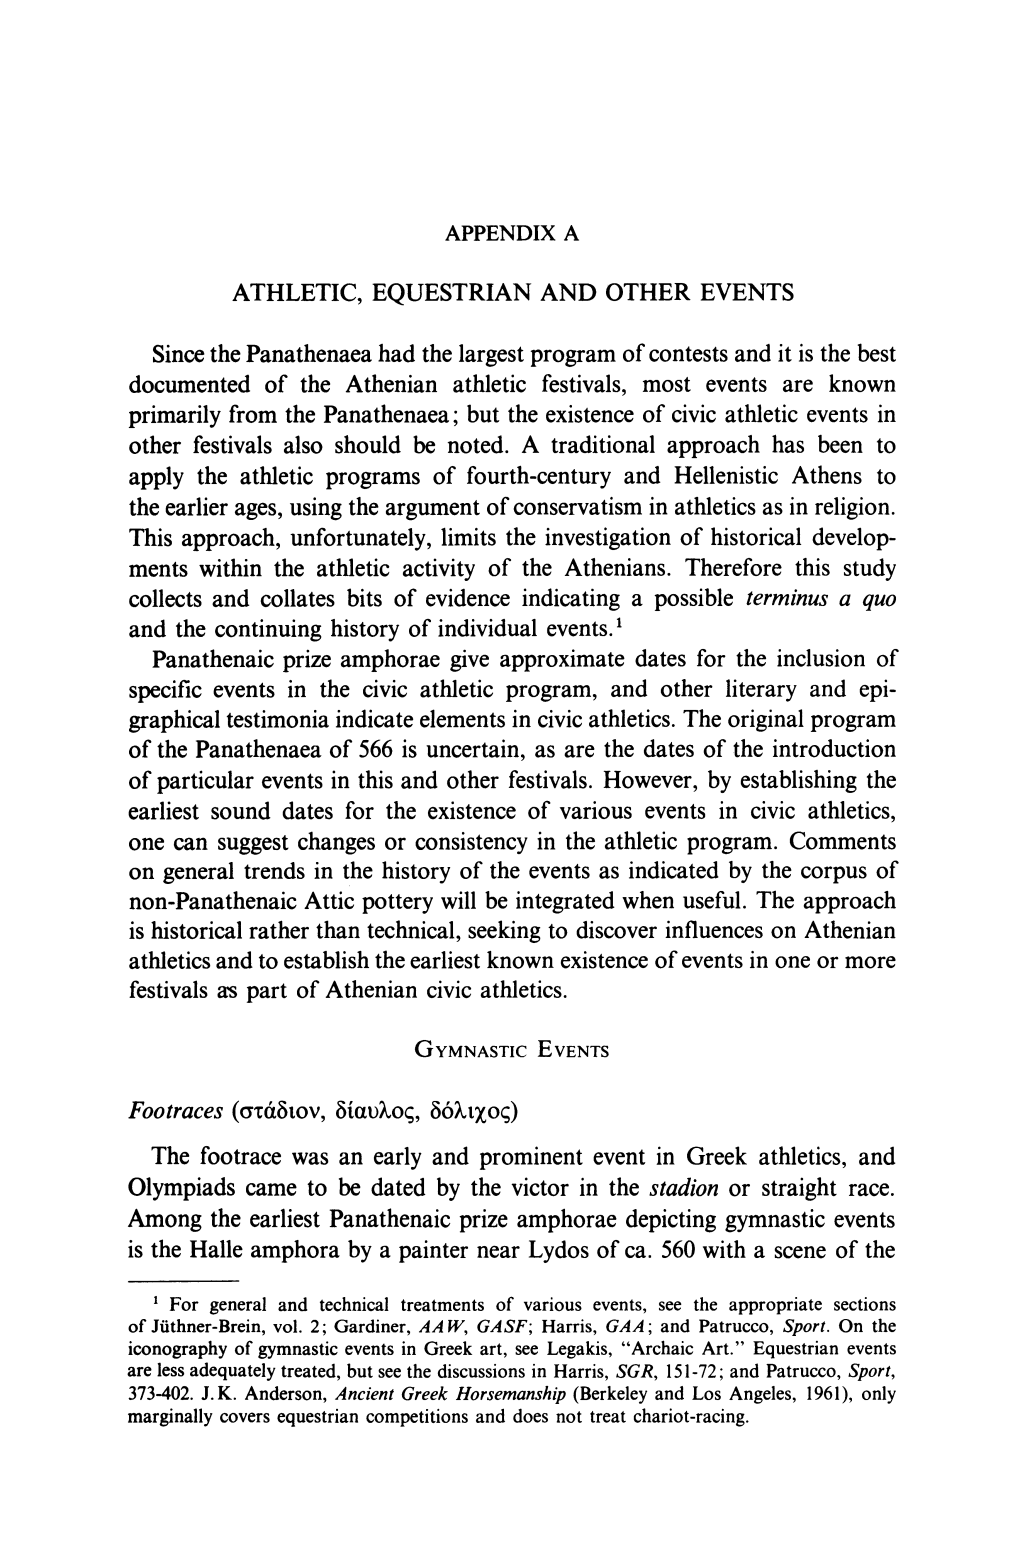 ATHLETIC, EQUESTRIAN and OTHER EVENTS Since the Panathenaea Had the Largest Program of Contests and It Is the Best Documented Of